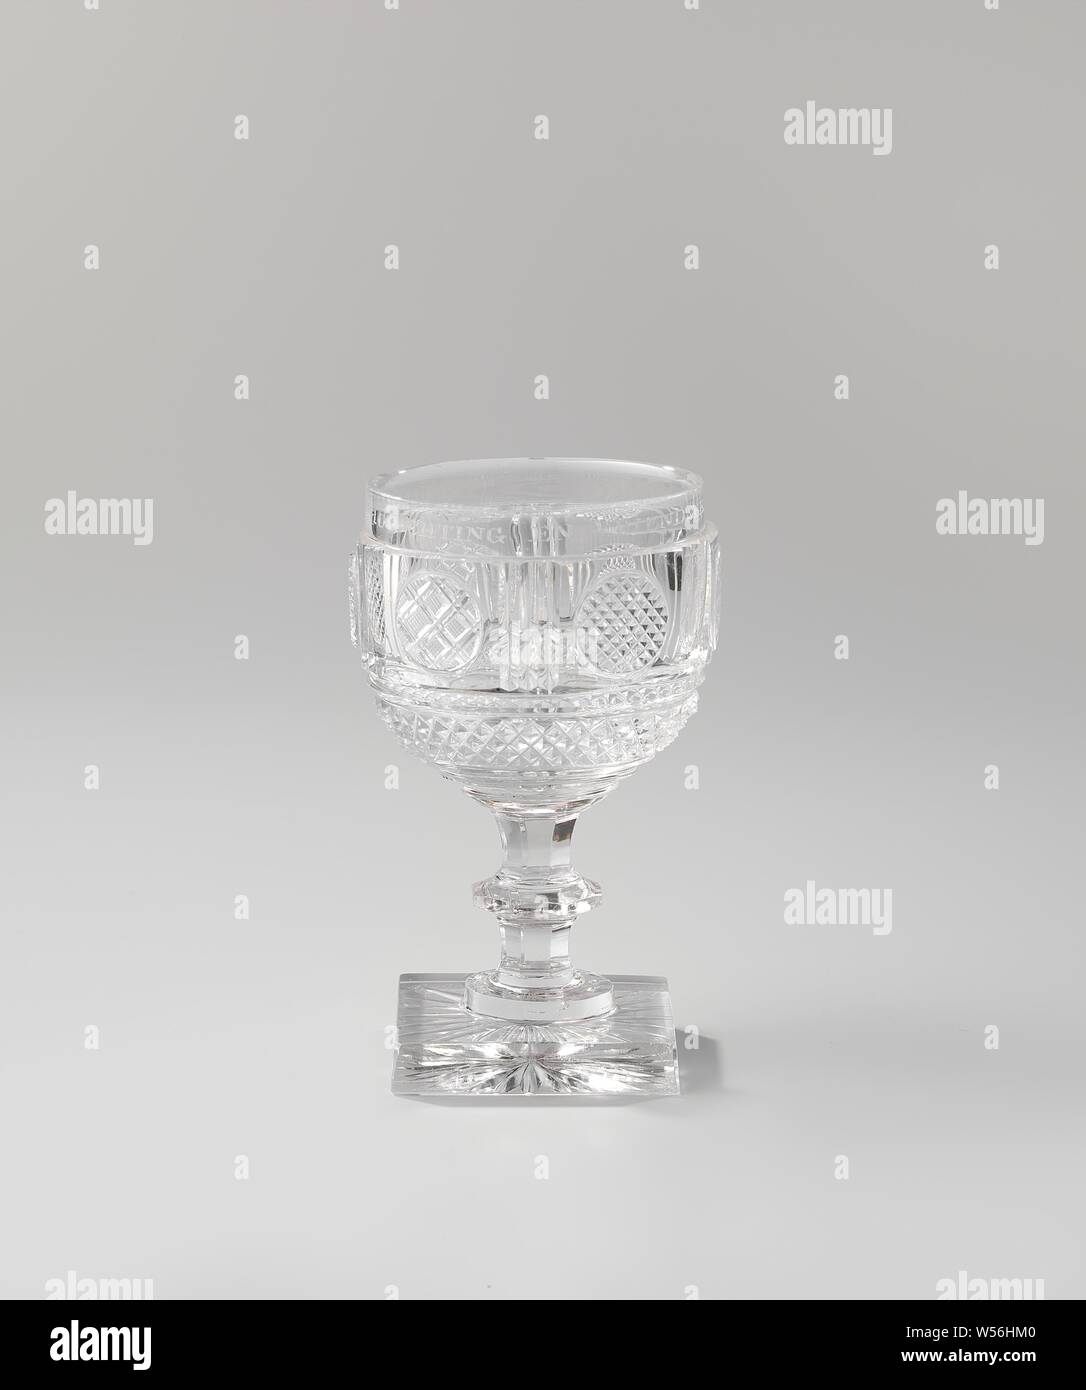 Chalice on a square base, with the inscription: CITADEL ANTW. 1830 & 1831 H J v Mourik 2 Lt Kwartm, Thick, square, smooth base, star-shaped underside. Faceted stem with a disk. Spherical cup with a smooth mouth edge. The chalice has three rings at the bottom, above which a diamond-shaped band in relief, after which six medallions, interrupted by vertical notches, circles in the squares, alternately followed with diamond reliefs, top edge smooth with text: OUT OF HIGHLIGHTS AND FRIENDSHIP. Chalice m. CITADEL ANTW. 1830 & 1831 H J v Mourik 2 Lt Kwartm, Citadel of Antwerp (19th century Stock Photo